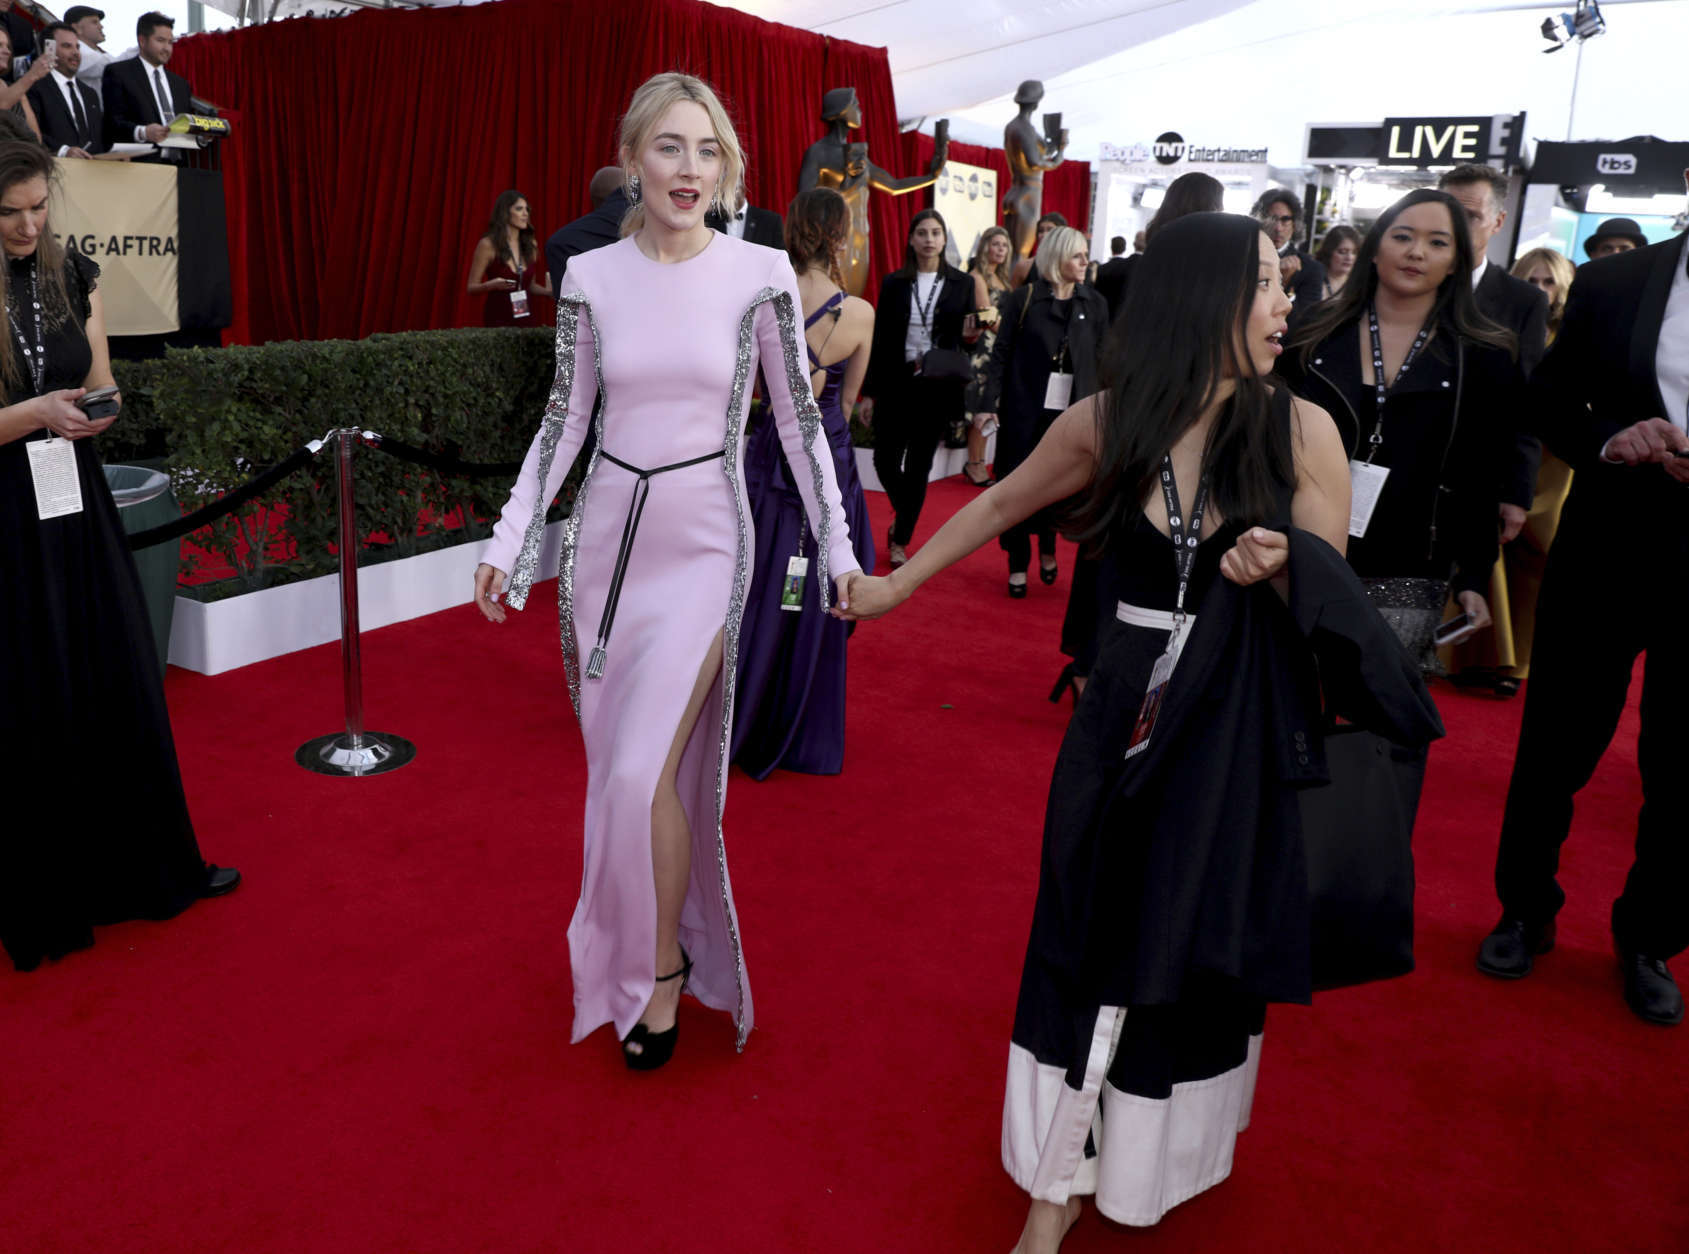 Saoirse Ronan arrives at the 24th annual Screen Actors Guild Awards at the Shrine Auditorium &amp; Expo Hall on Sunday, Jan. 21, 2018, in Los Angeles. (Photo by Matt Sayles/Invision/AP)